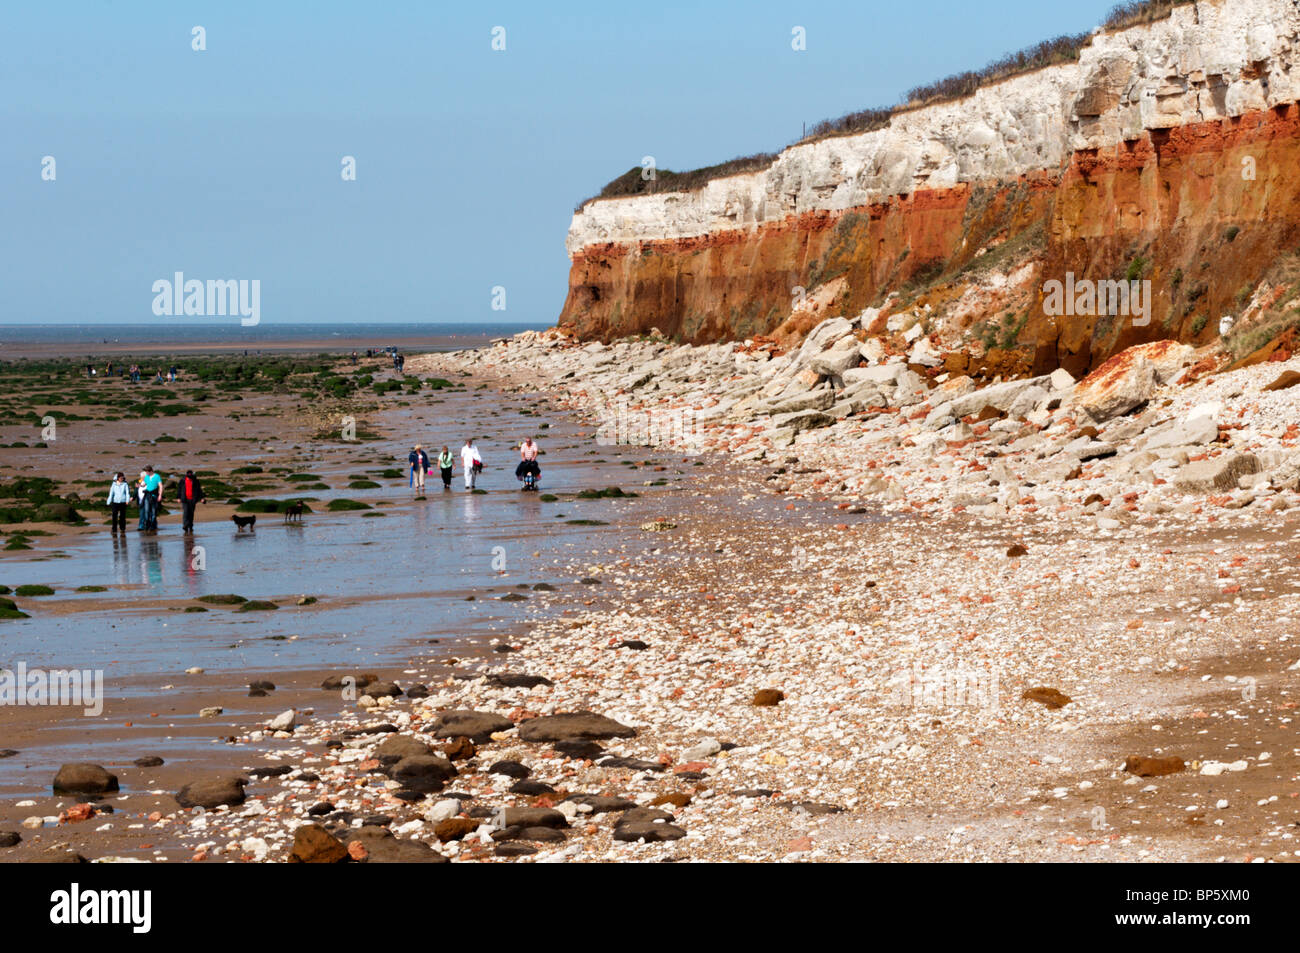 The red and white banded cliffs of Hunstanton on the Norfolk coast, England at low tide Stock Photo